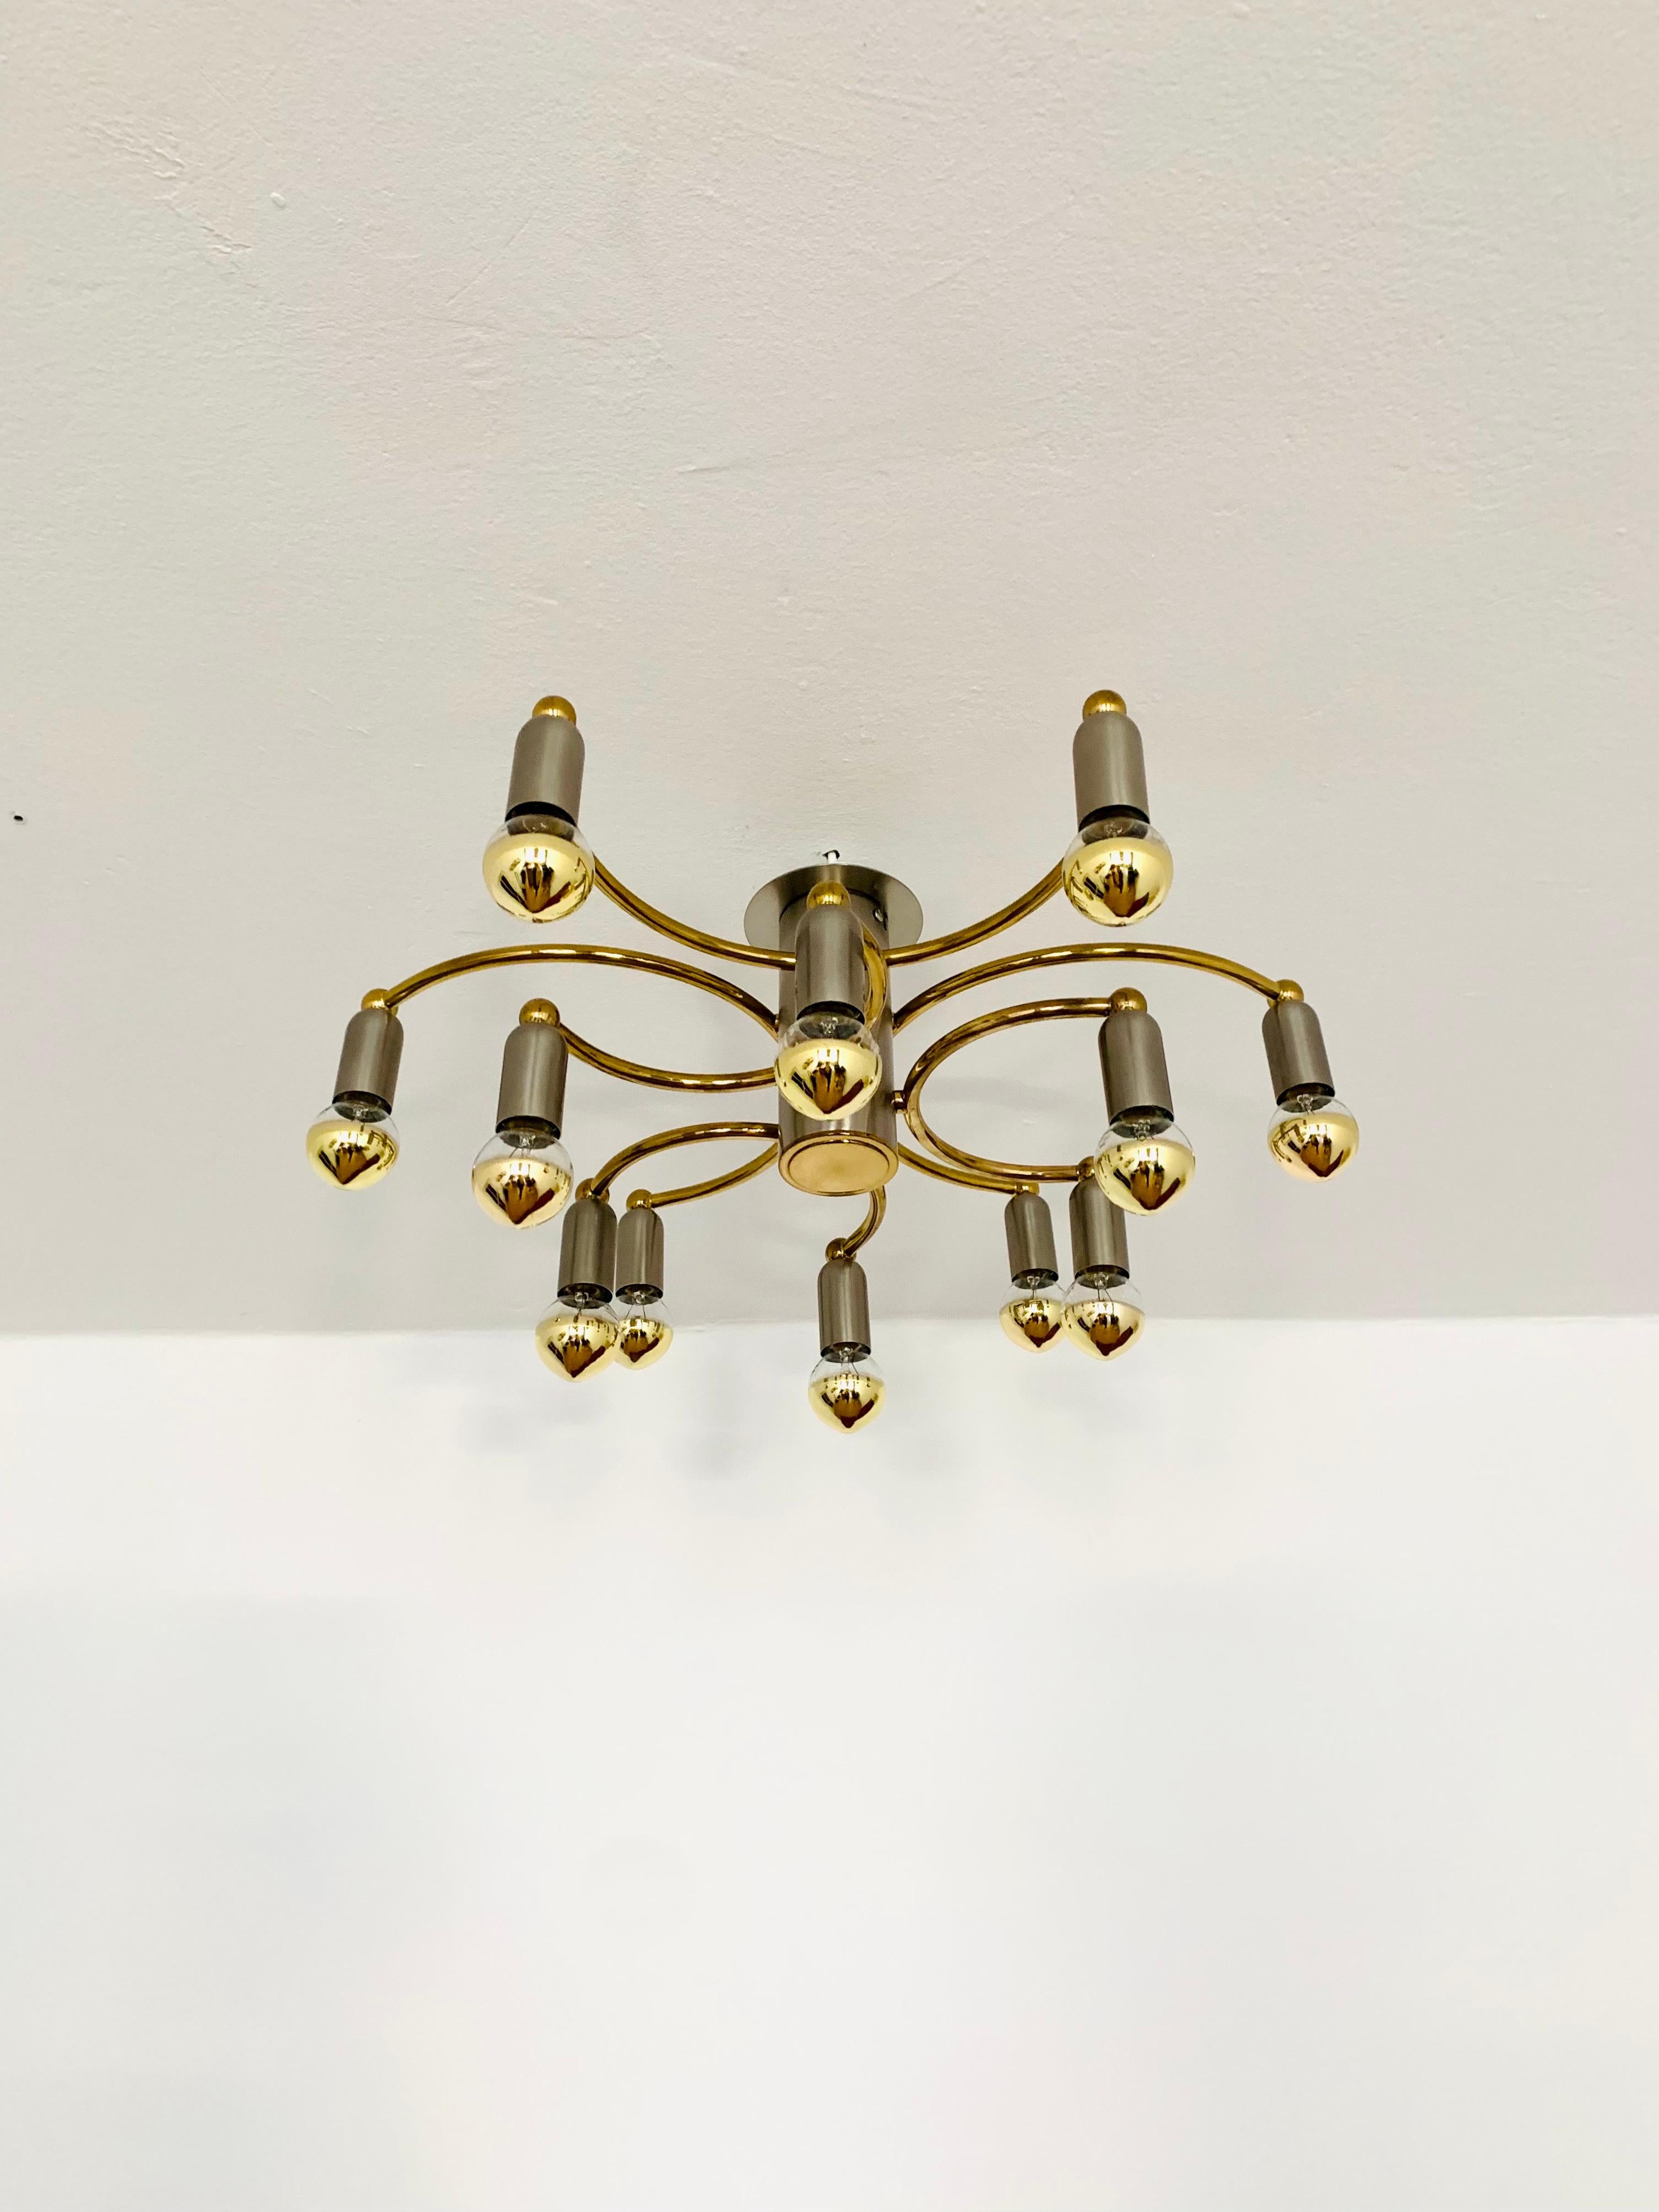 Very rare Sputnik ceiling lamp from the 1960s.
Very high quality and solid workmanship.
An enrichment for every home.
The design creates an exciting, fiery play of light.

Manufacturer: Brothers Cosack

Condition:

Very good vintage condition with